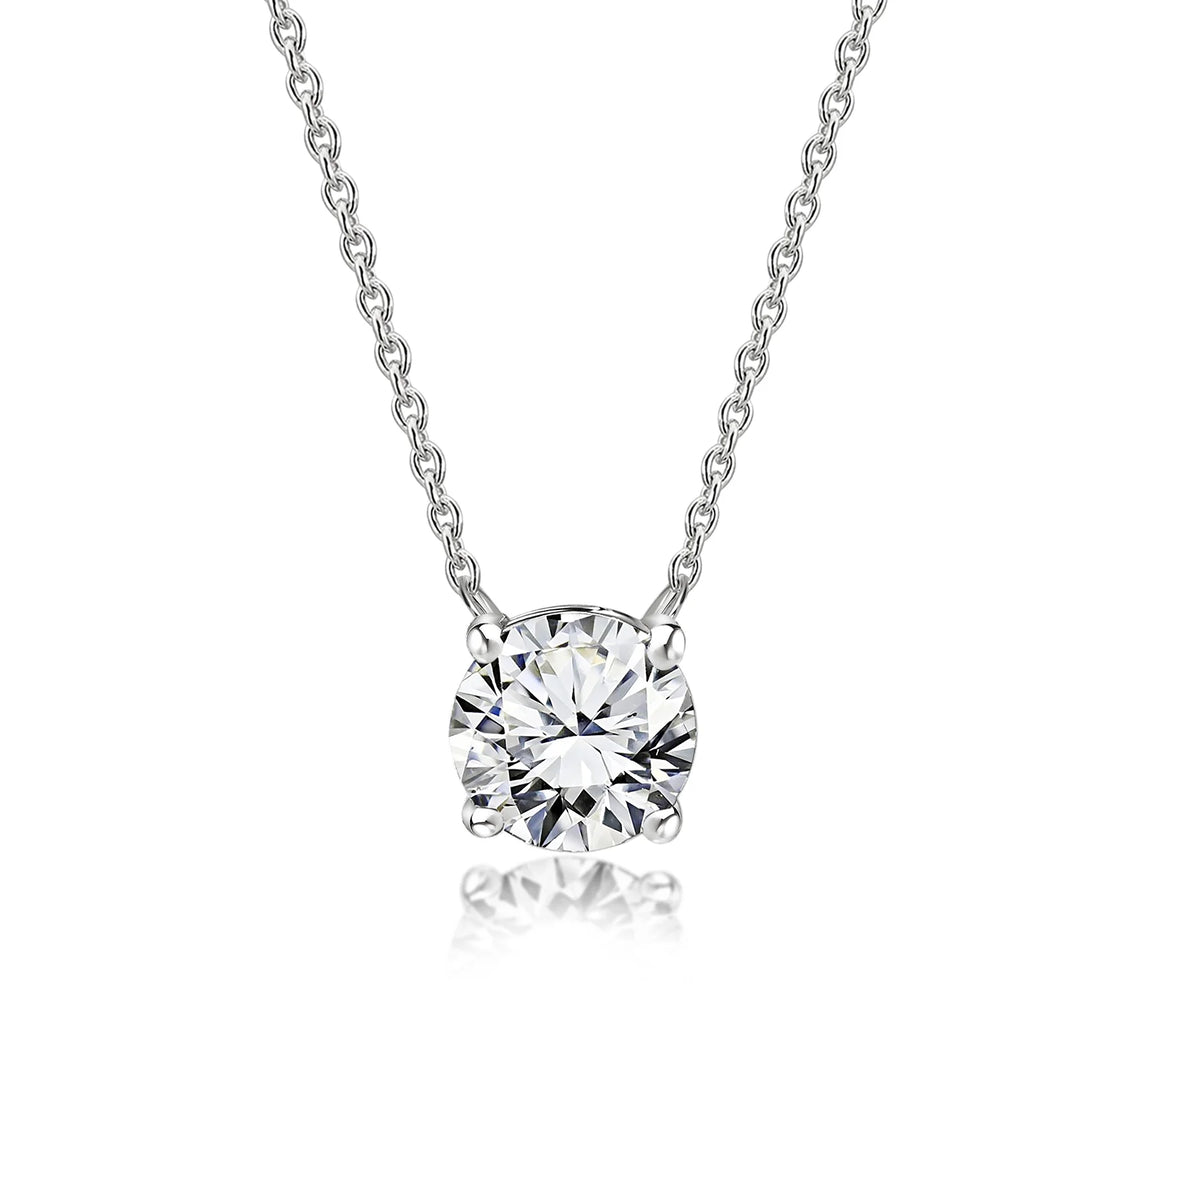 Carat Round Cut Moissanite Solitaire Pendant Necklace in 18k White Gold over Silver, Female, Adult